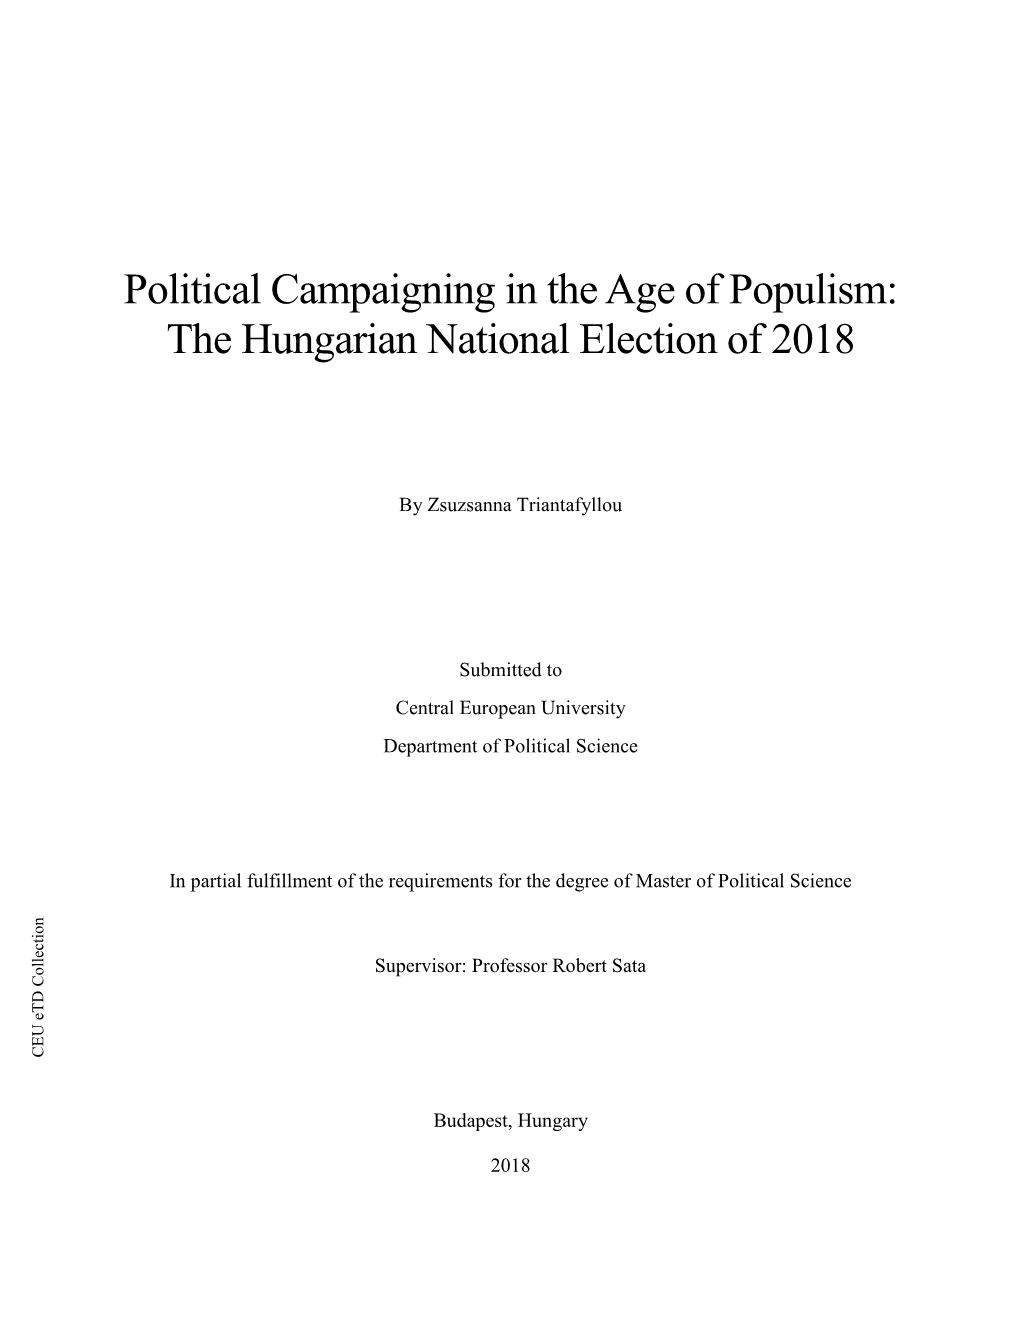 Political Campaigning in the Age of Populism: the Hungarian National Election of 2018